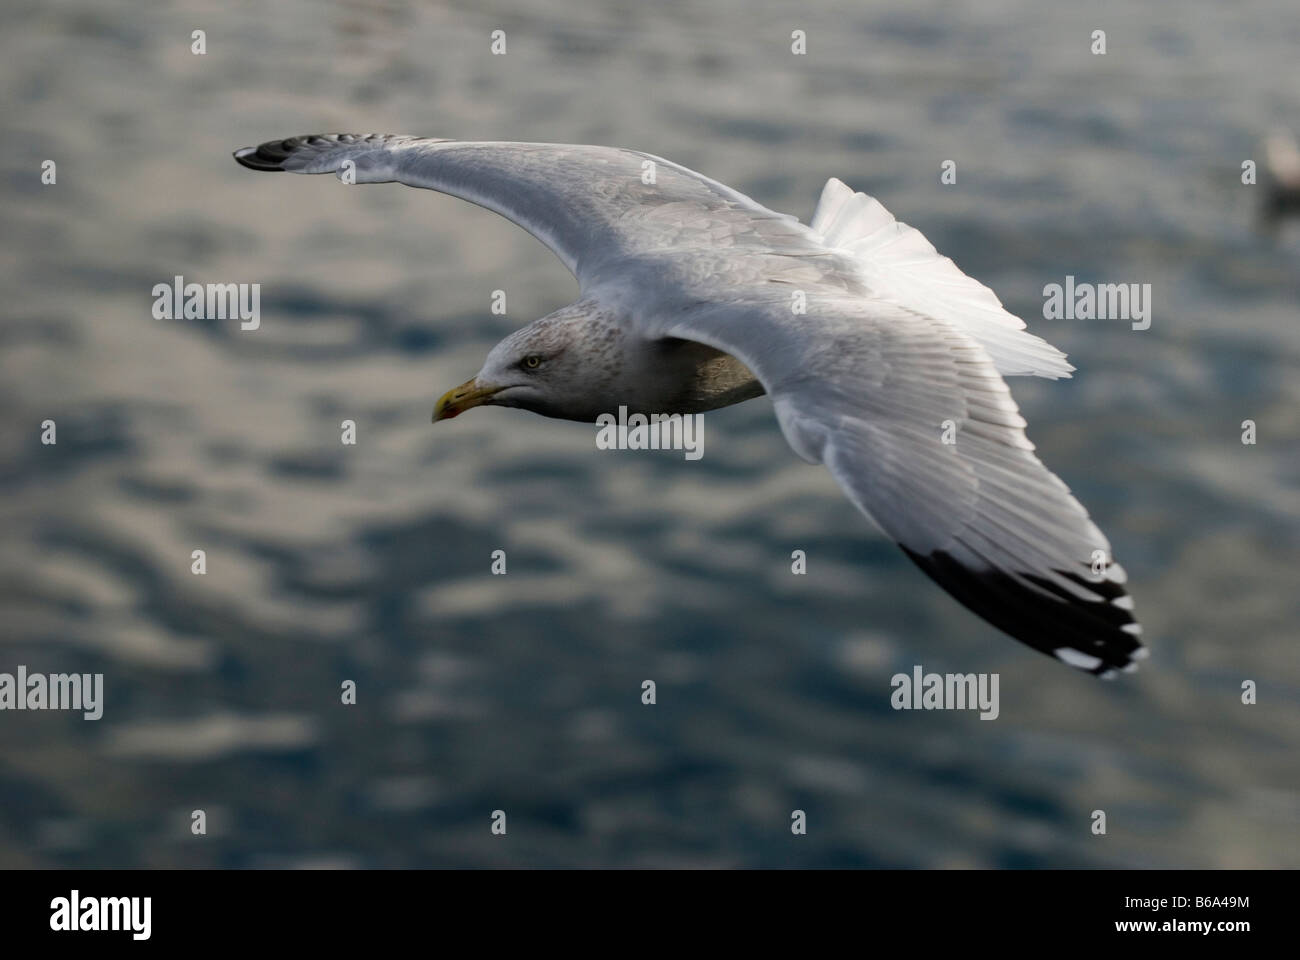 A seagull in flight Stock Photo